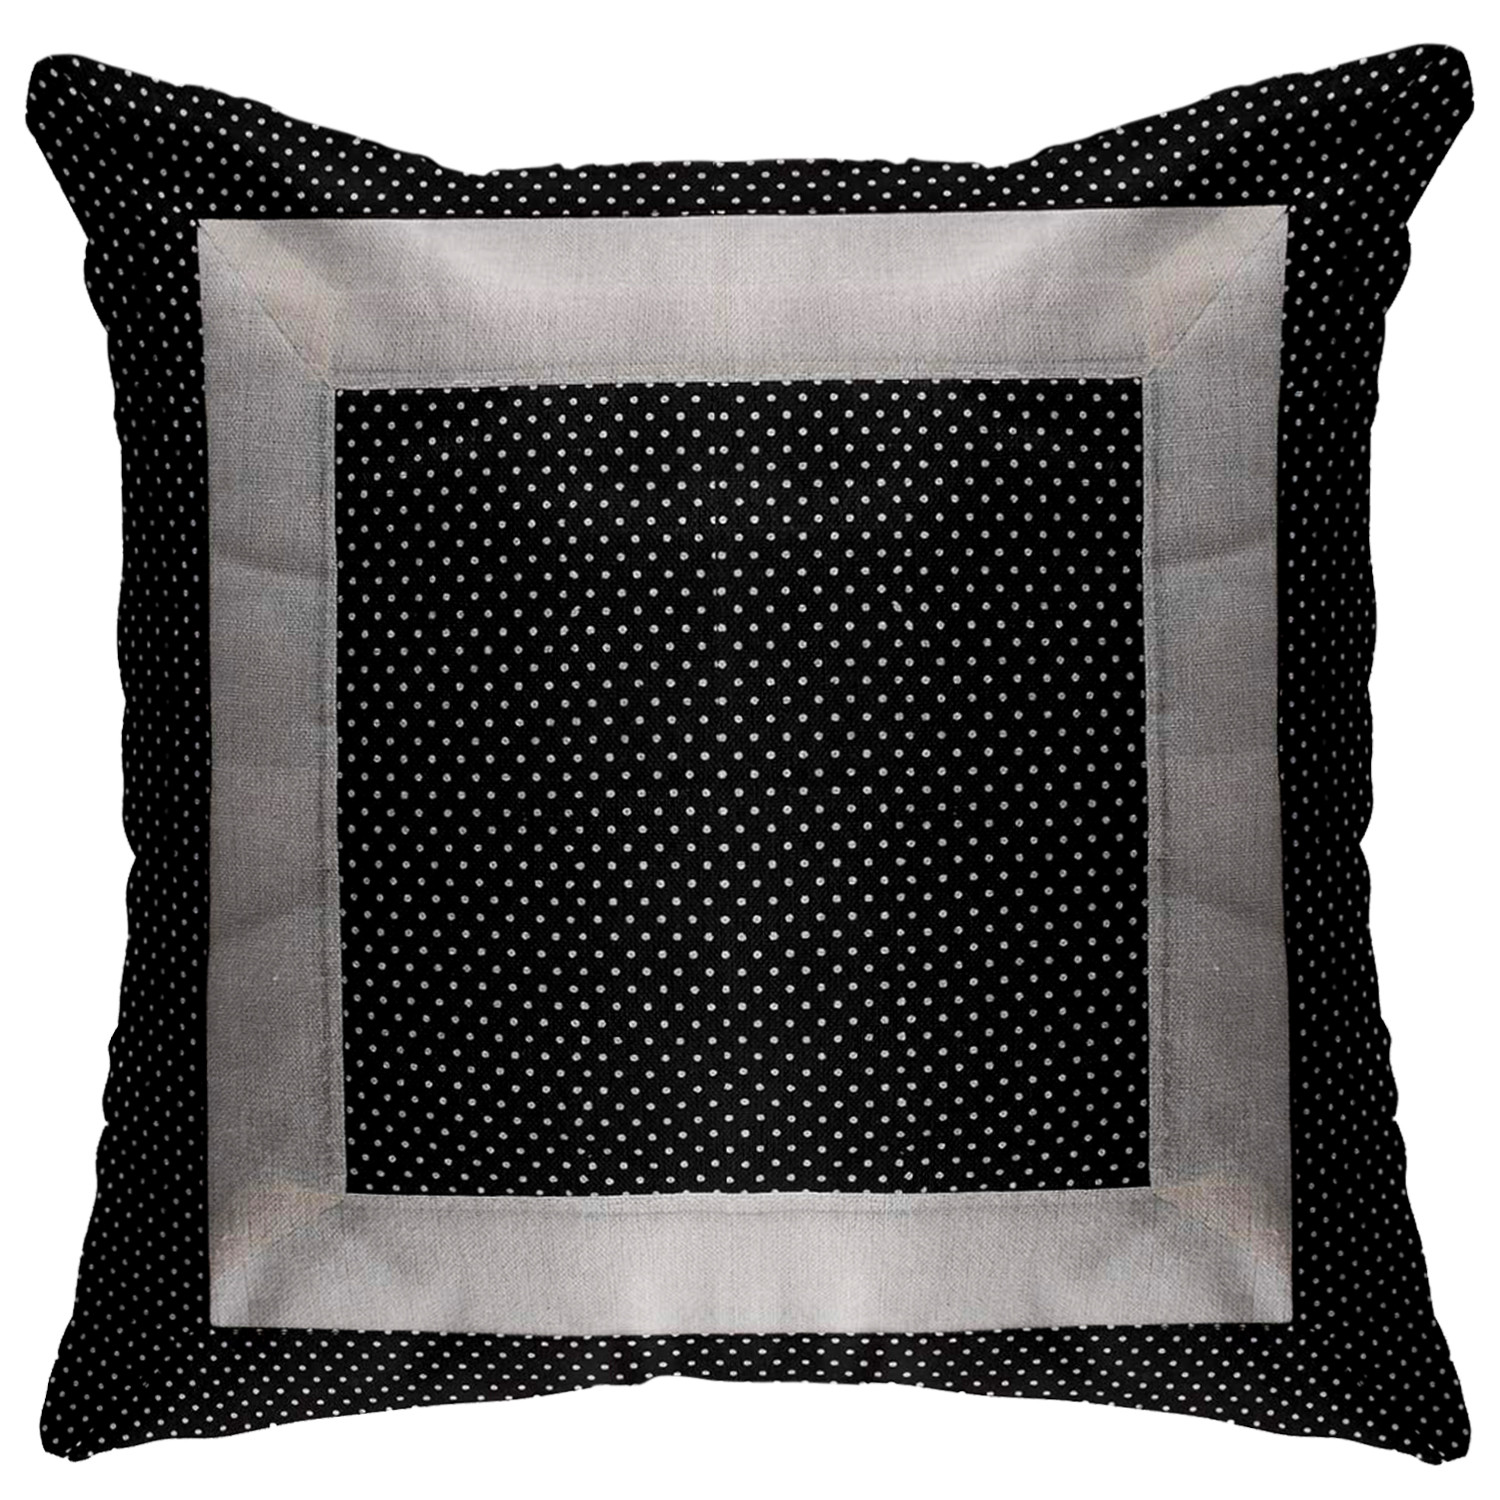 Kuber Industries Dot Printed Cotton Comfortable Decorative Throw Pillow Case Square Cushion Cover Pillowcas 16x16 Inches,(Black)